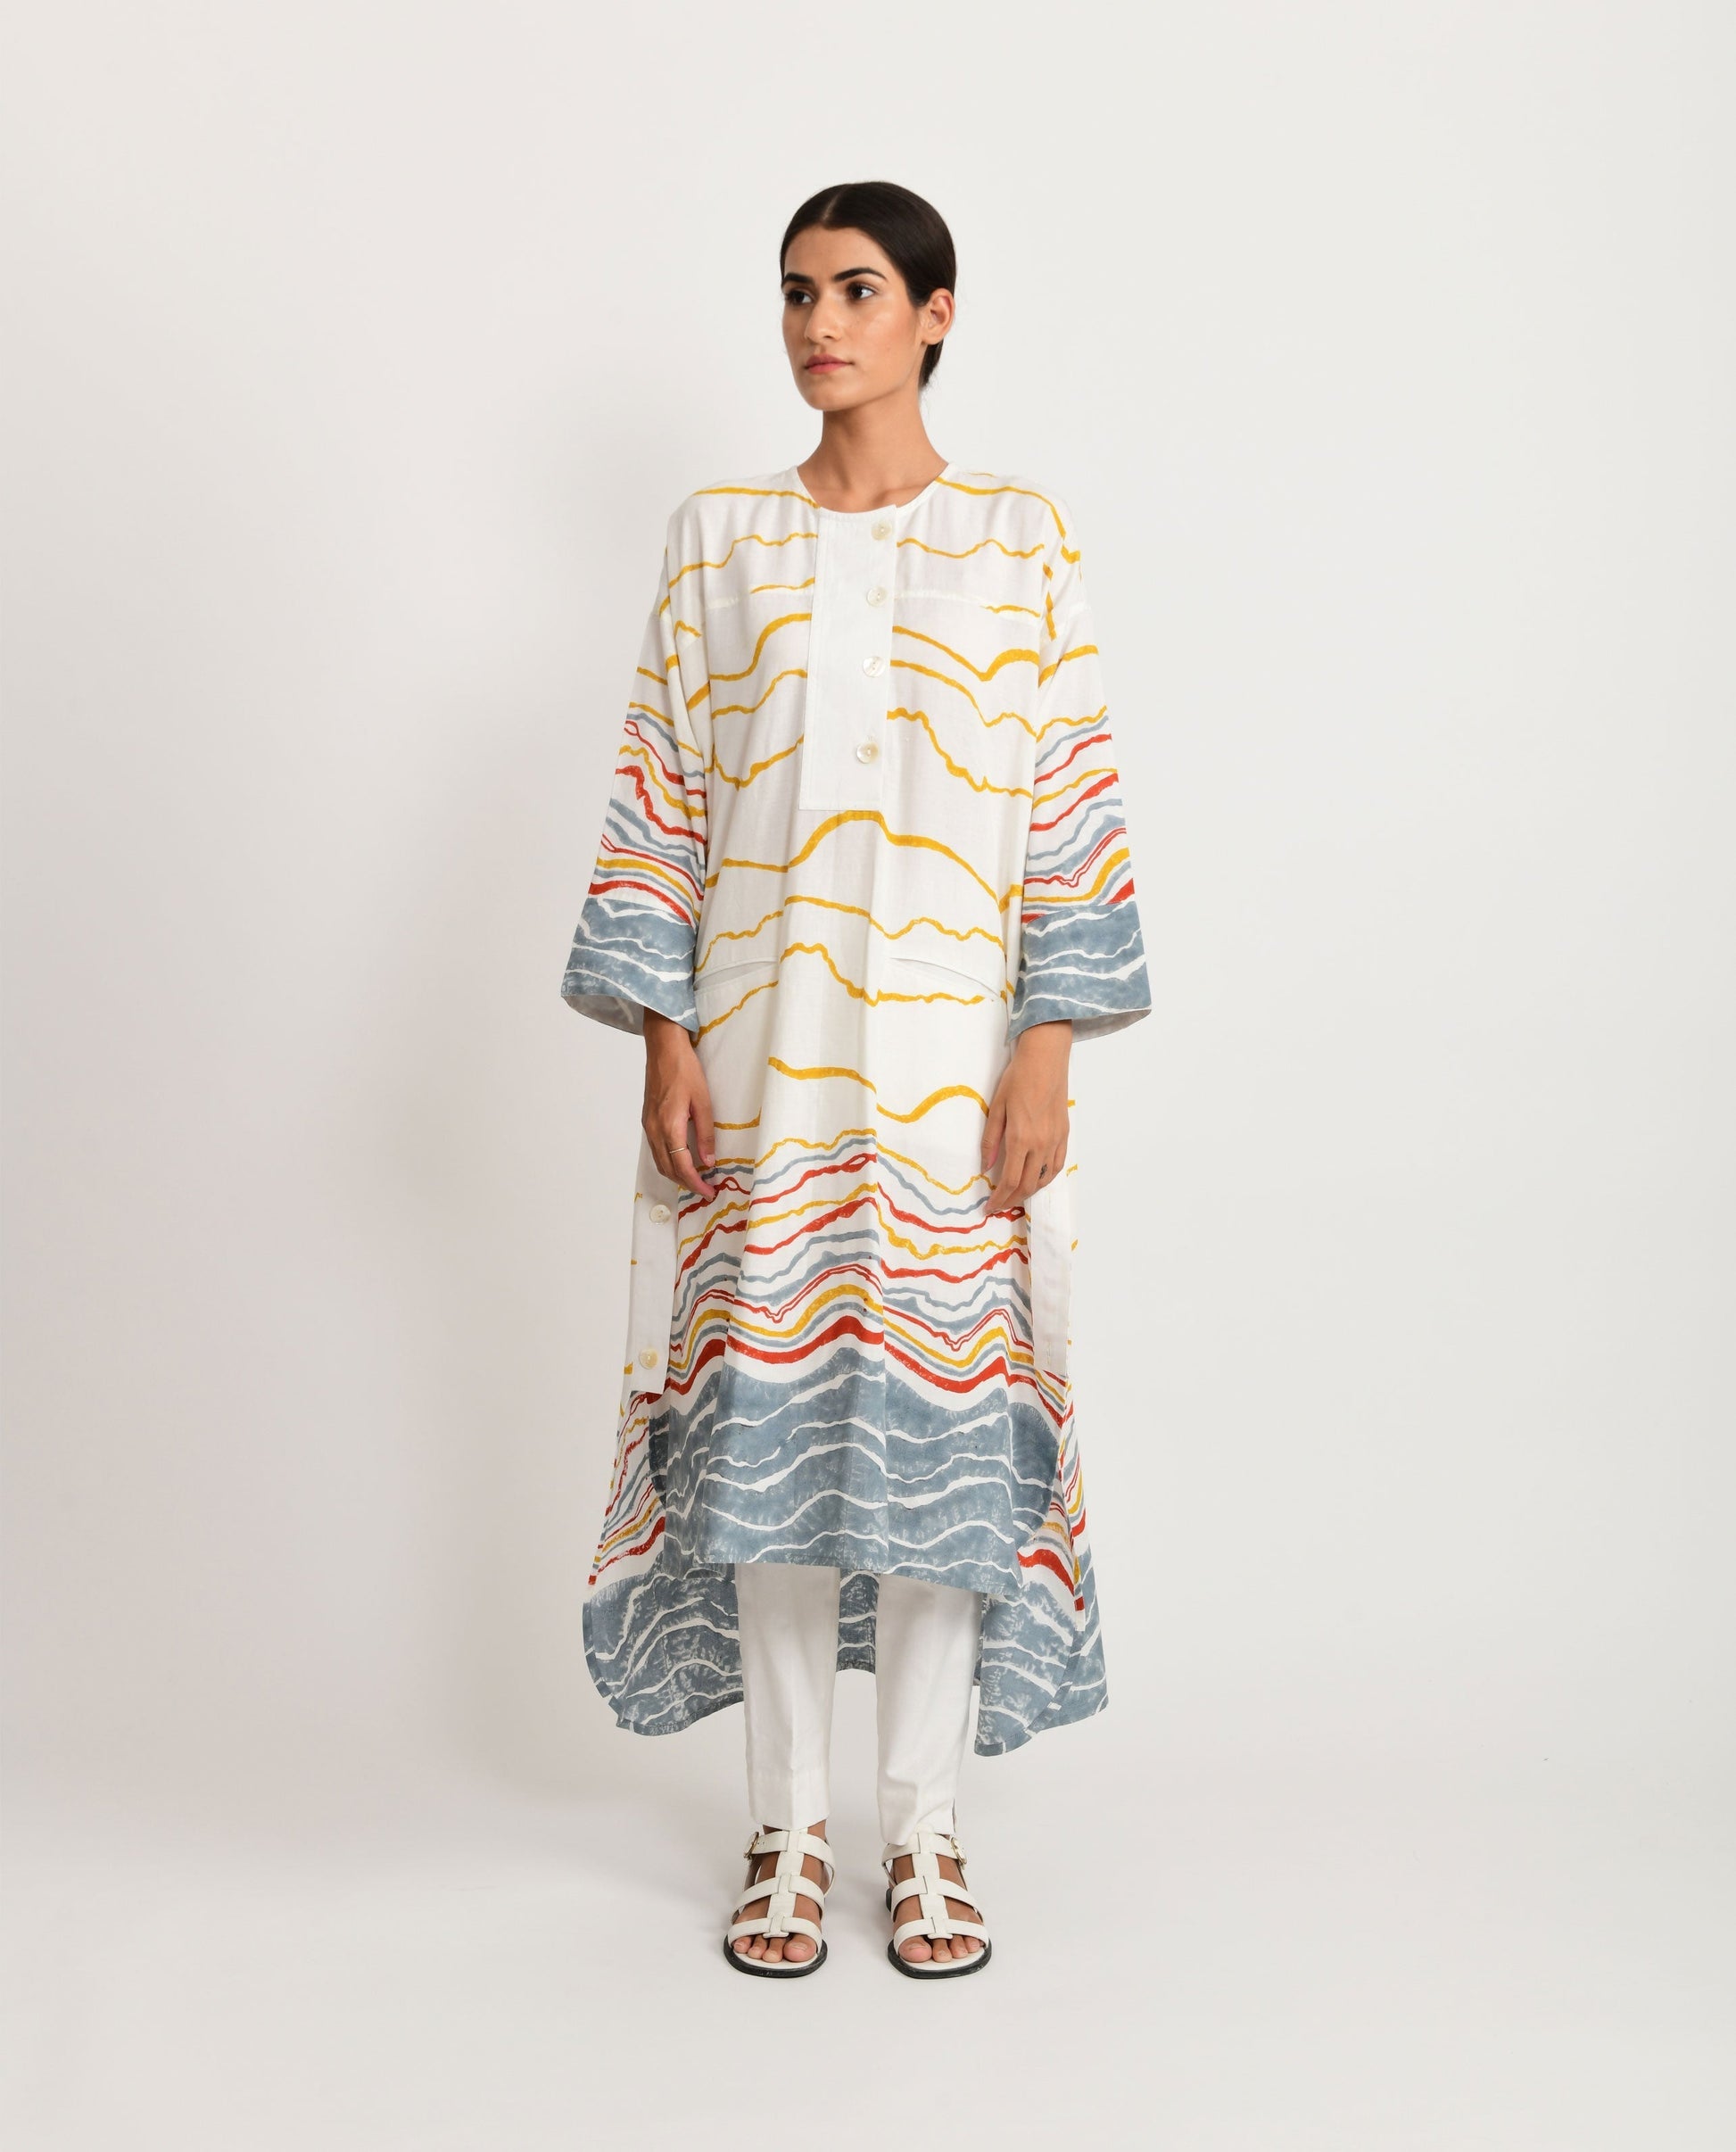 Azo Free Dye Block Printed Co-ord Set by Rias Jaipur with Azo Free Dye, Bamboo, Block Prints, Casual Wear, Co-ord Sets, Cotton, Parat, Parat by Rias Jaipur, Regular Fit, Travel Co-ords, White, Womenswear at Kamakhyaa for sustainable fashion